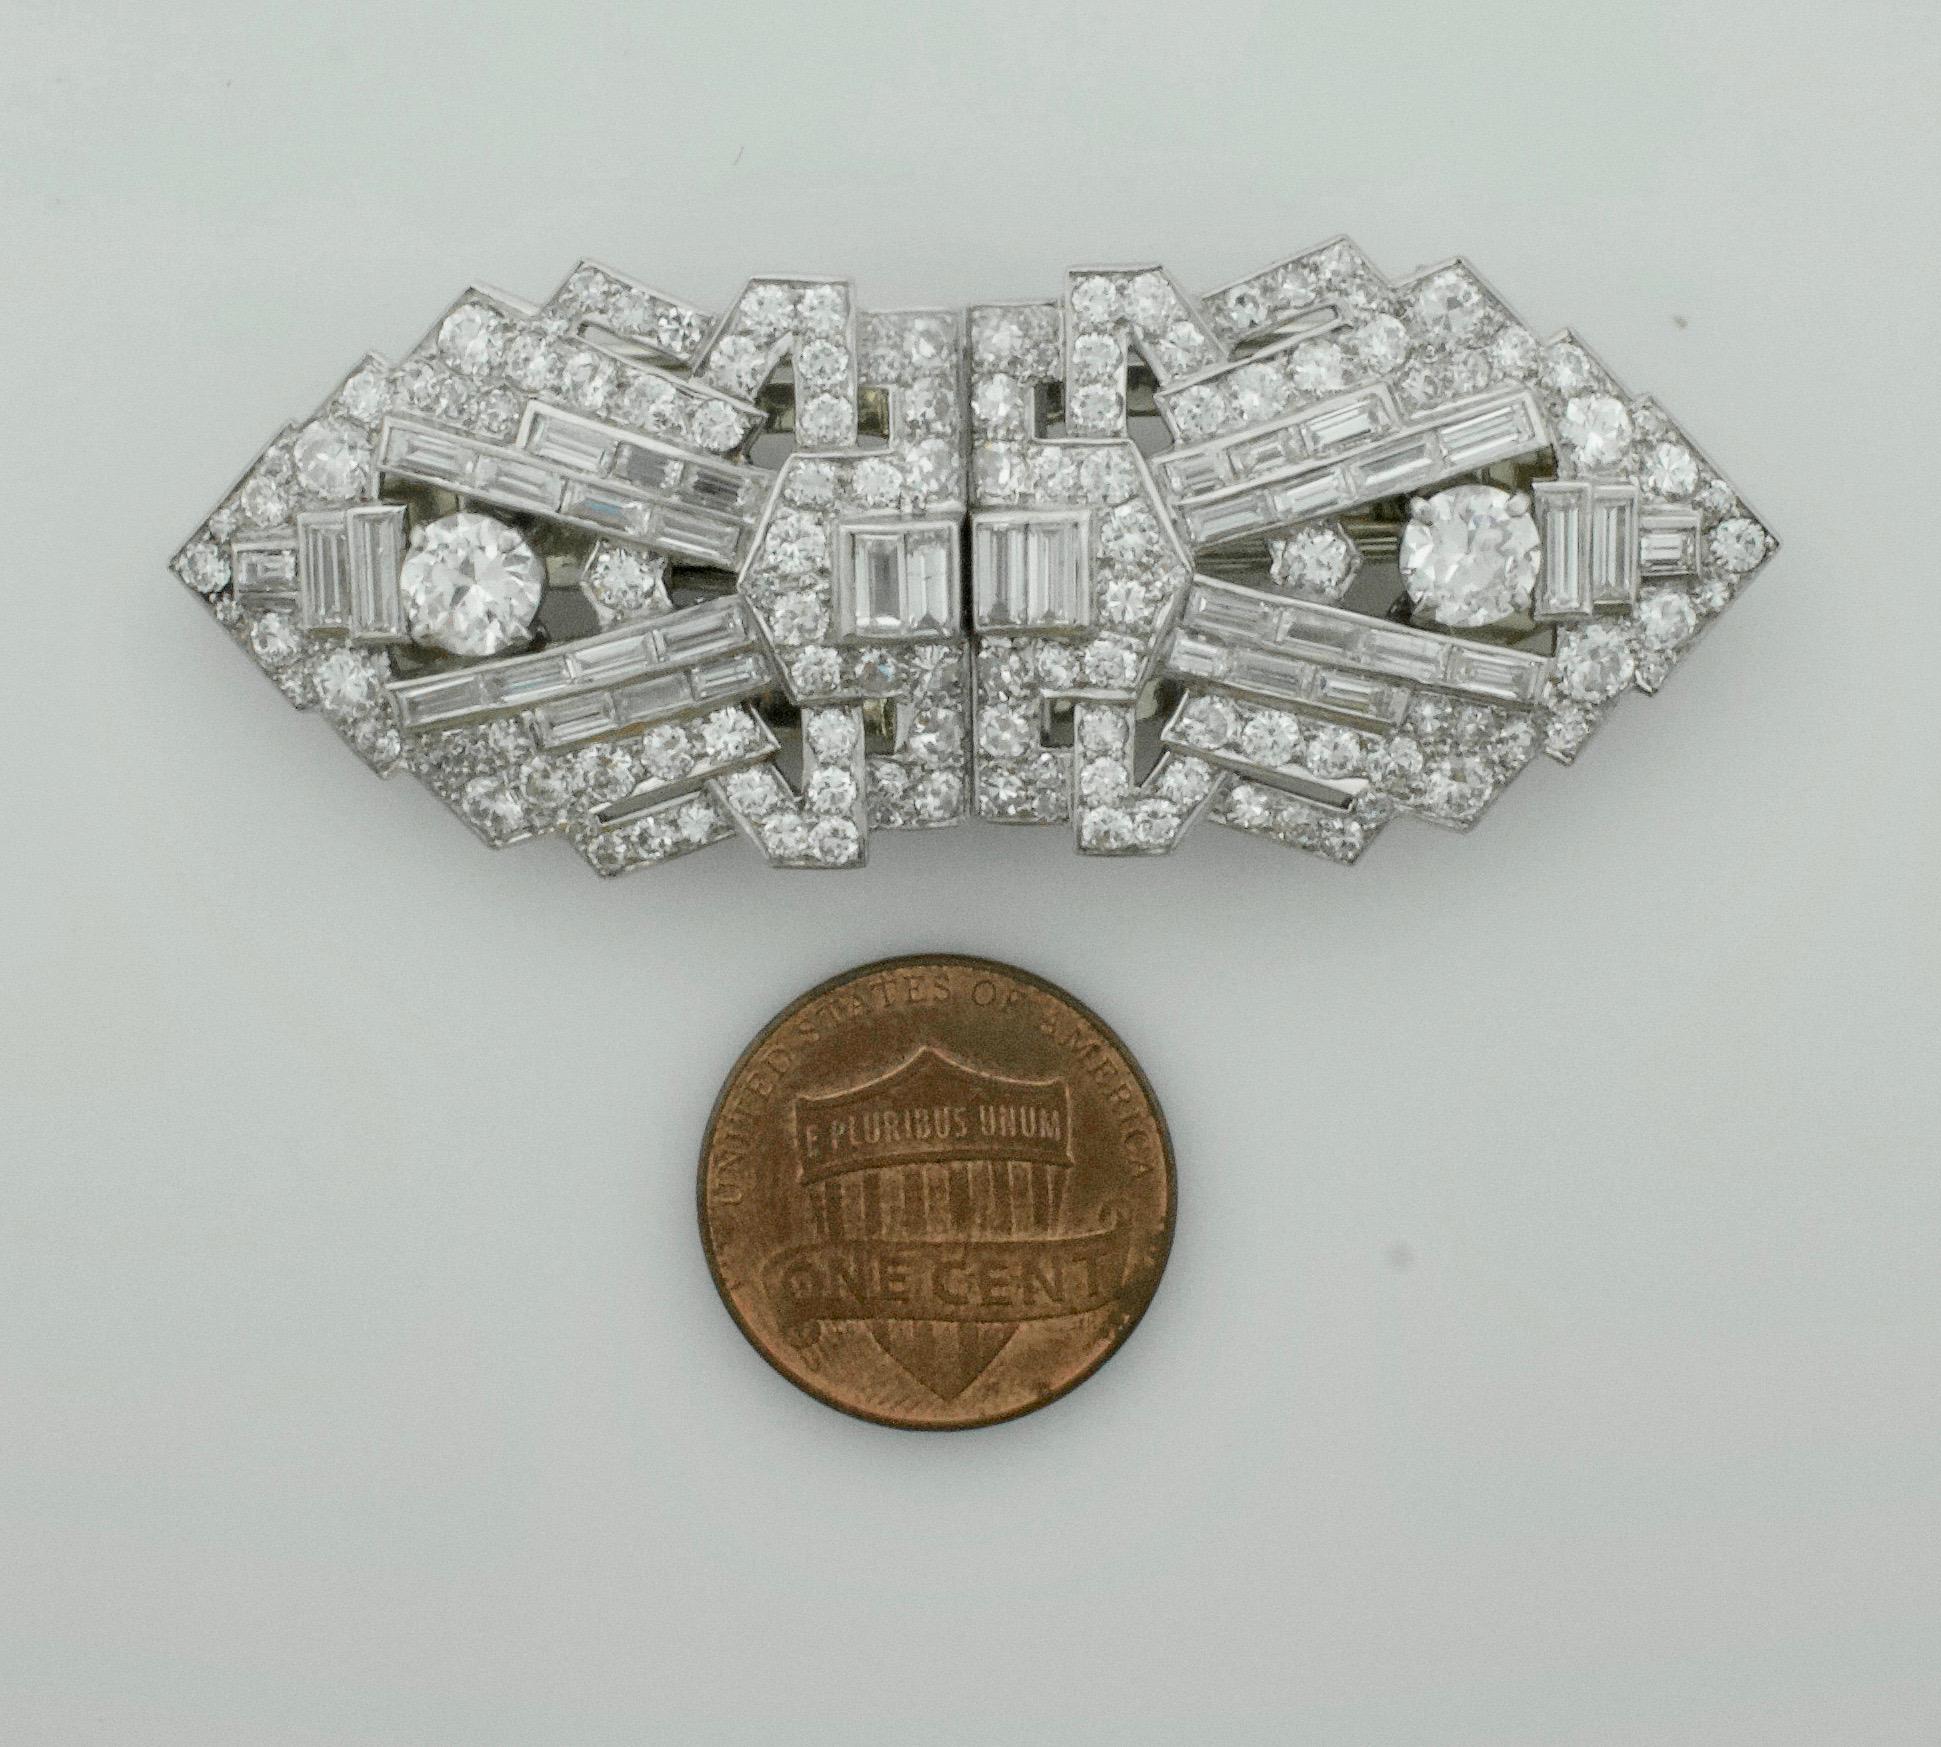 Art Deco Diamond  Brooch Clips Circa 1920's 7.70 carats
Two  Old European Cut Diamonds Weighing 1.20 Carats Approximately  [GH SI2]  [bright with no imperfections visible to the naked eye]
Thirty Four Baguette Cut Diamonds Weighing 2.00 Carats